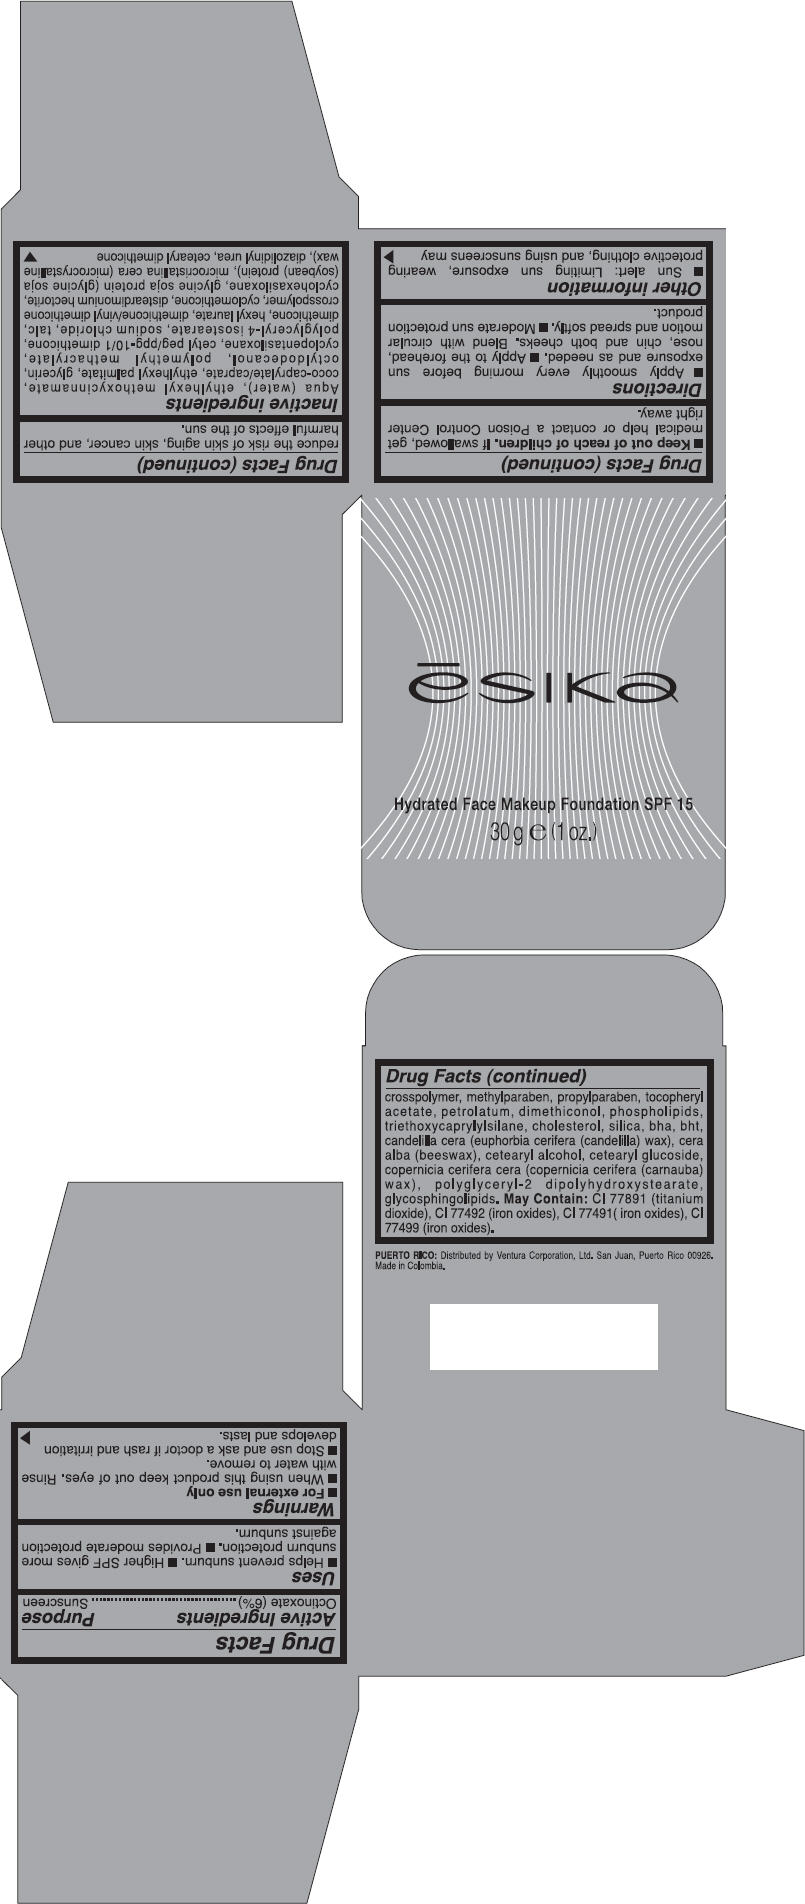 Esika Hydrated Face Makeup Foundation Spf 15 | Octinoxate Powder while Breastfeeding